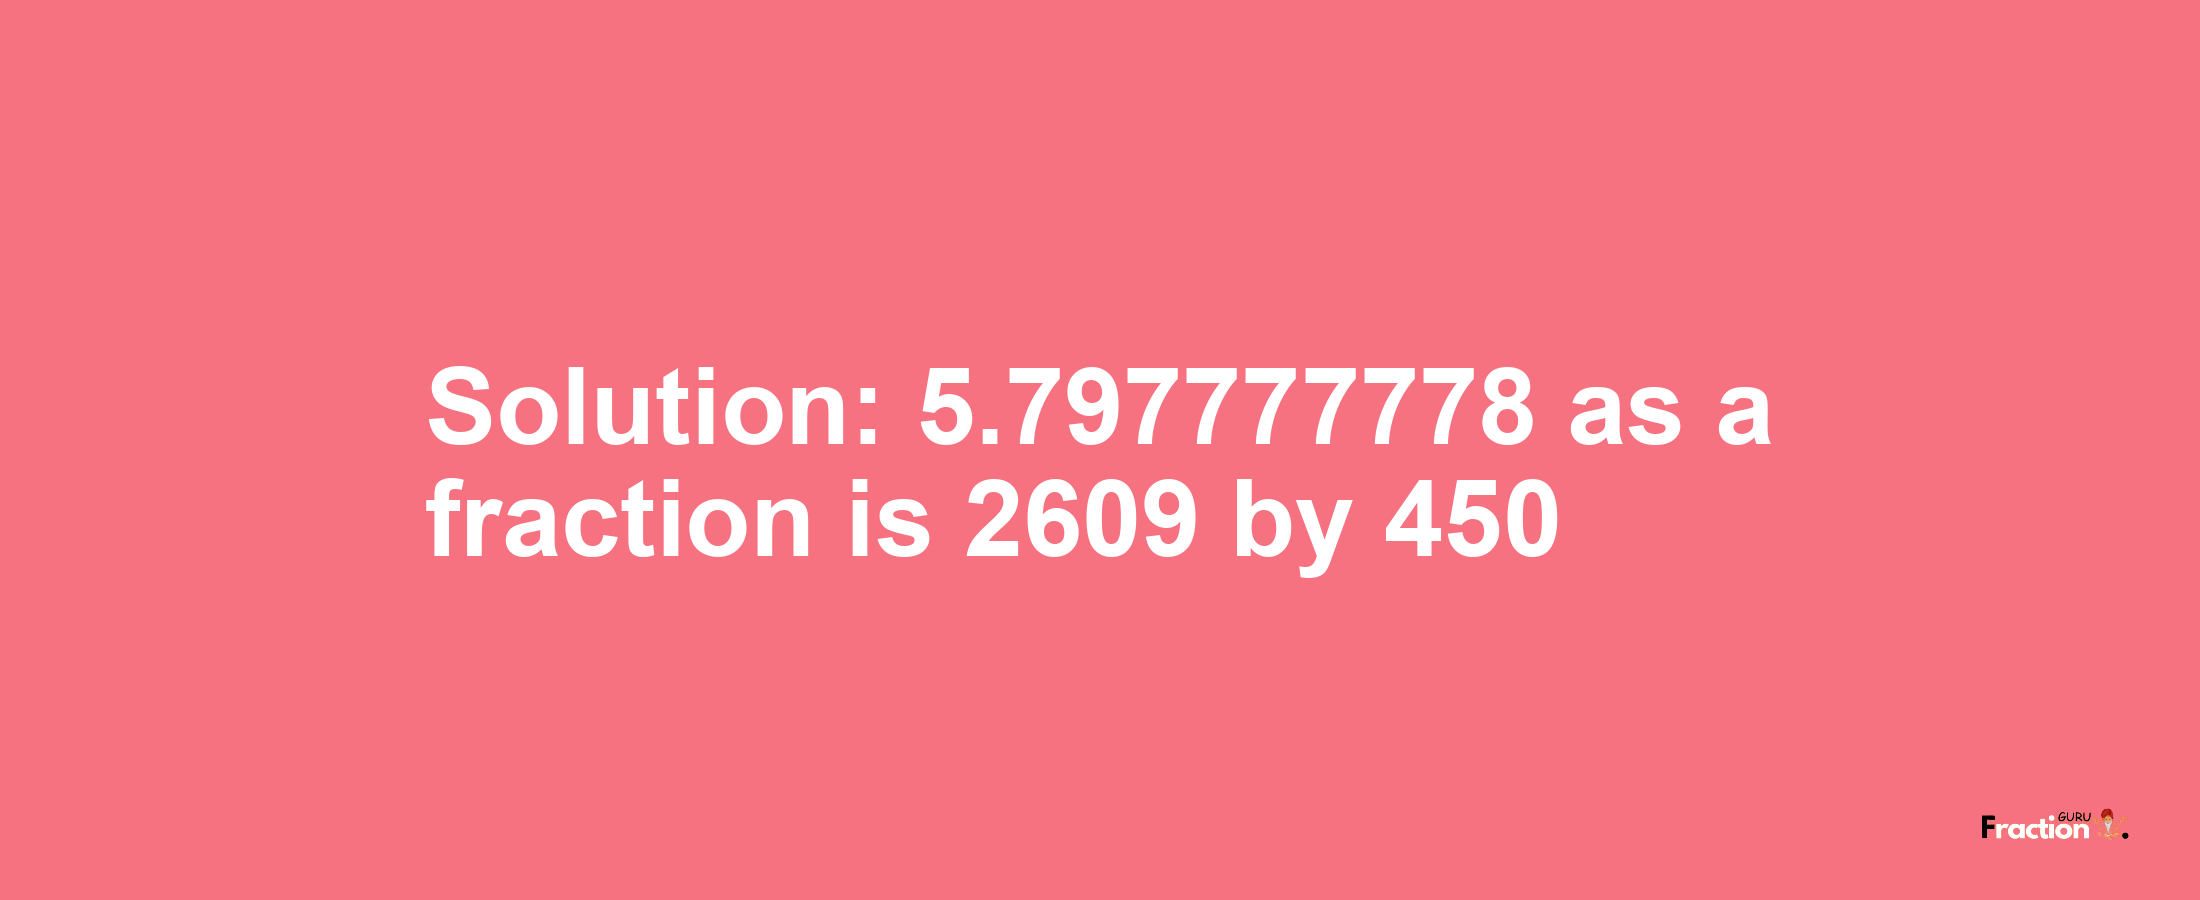 Solution:5.797777778 as a fraction is 2609/450